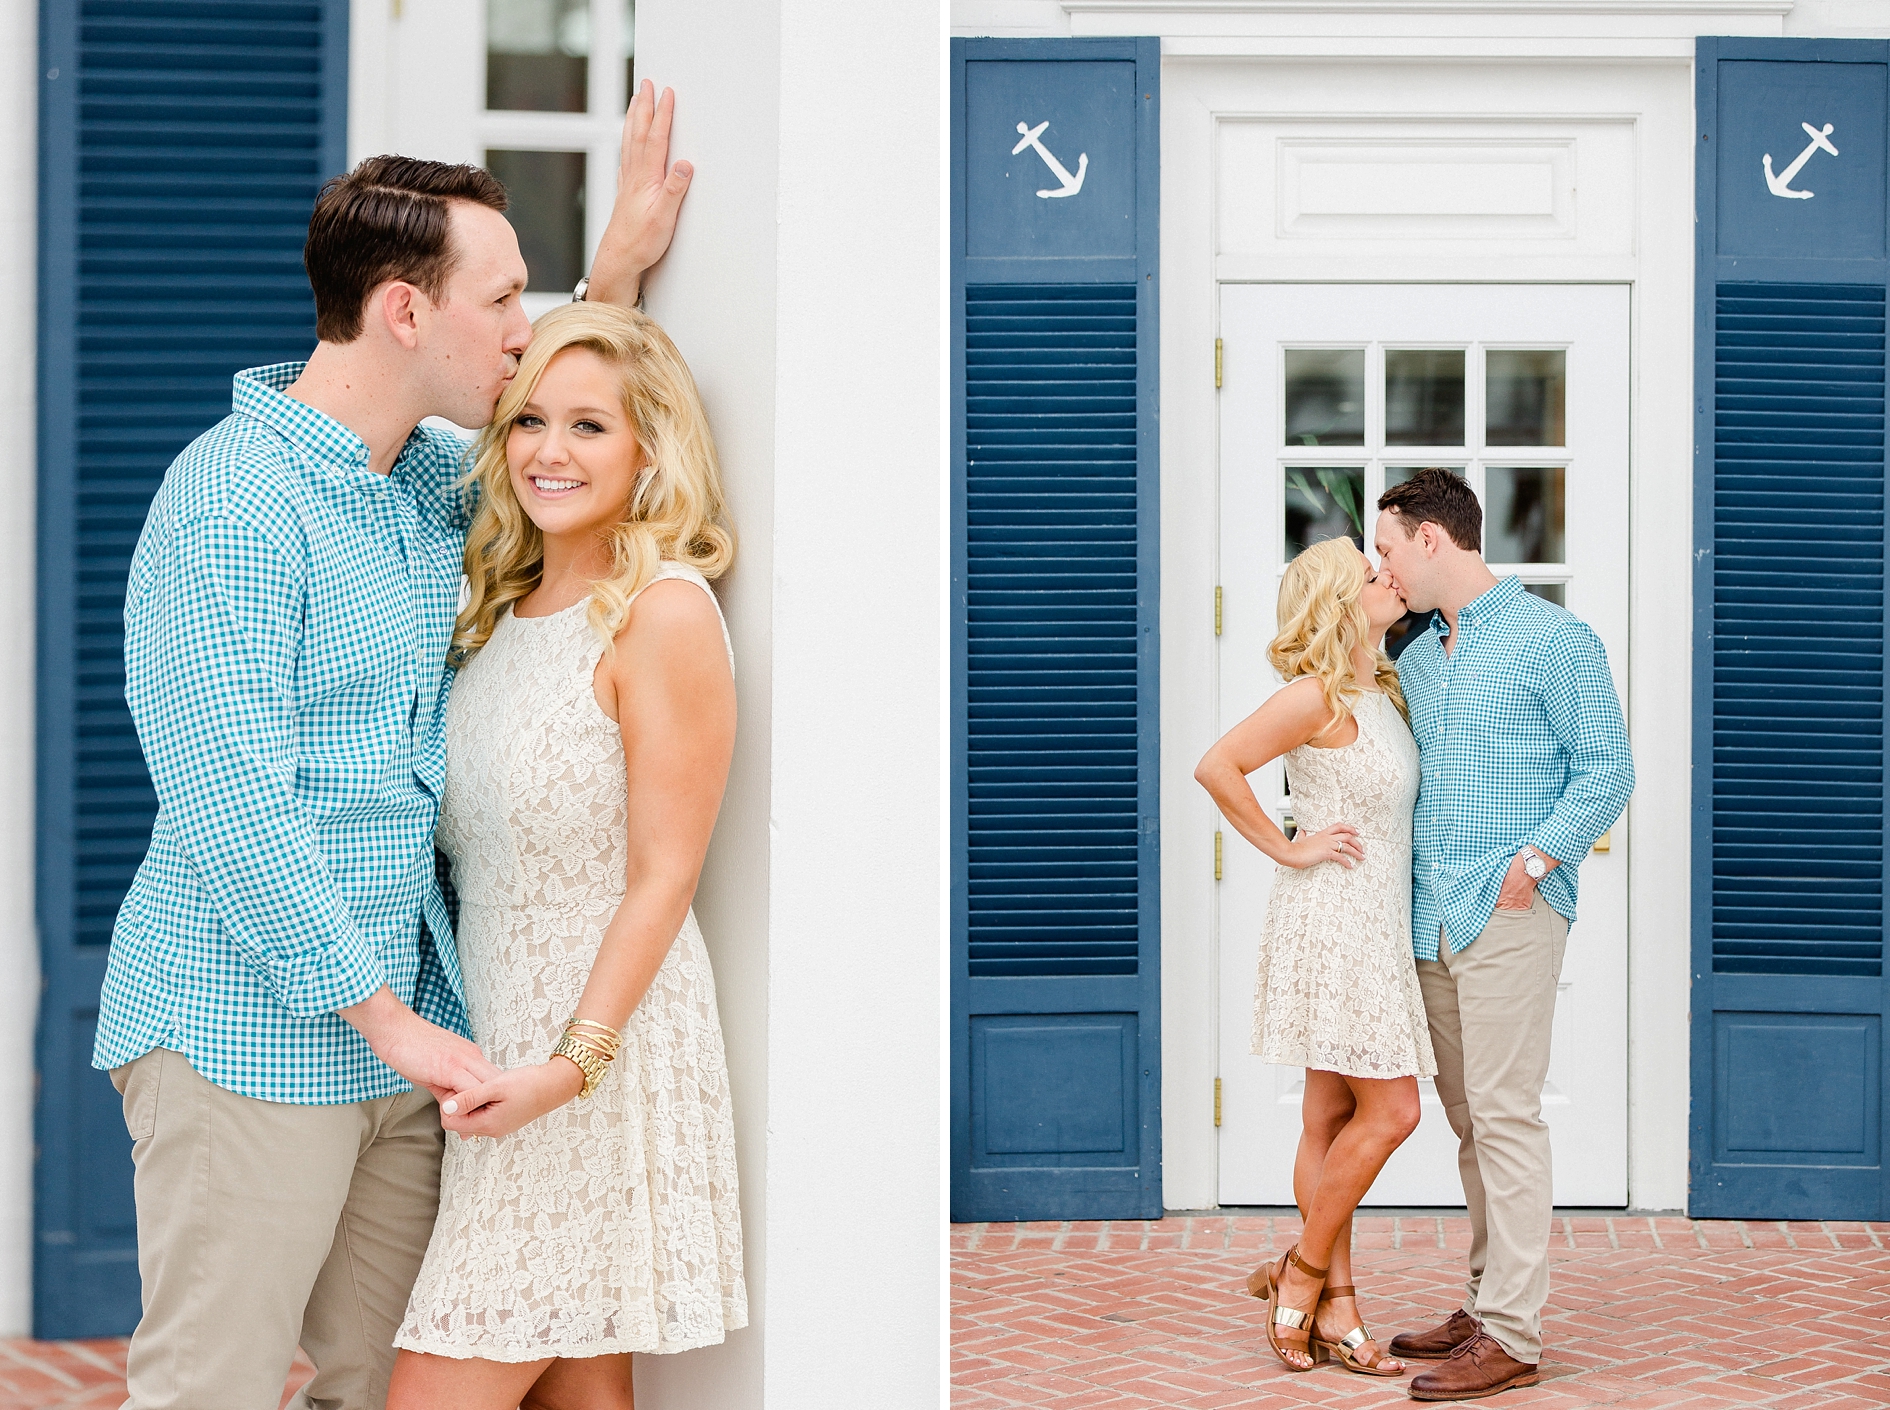 Tampa Yacht Club Engagement | © Ailyn La Torre Photography 2015